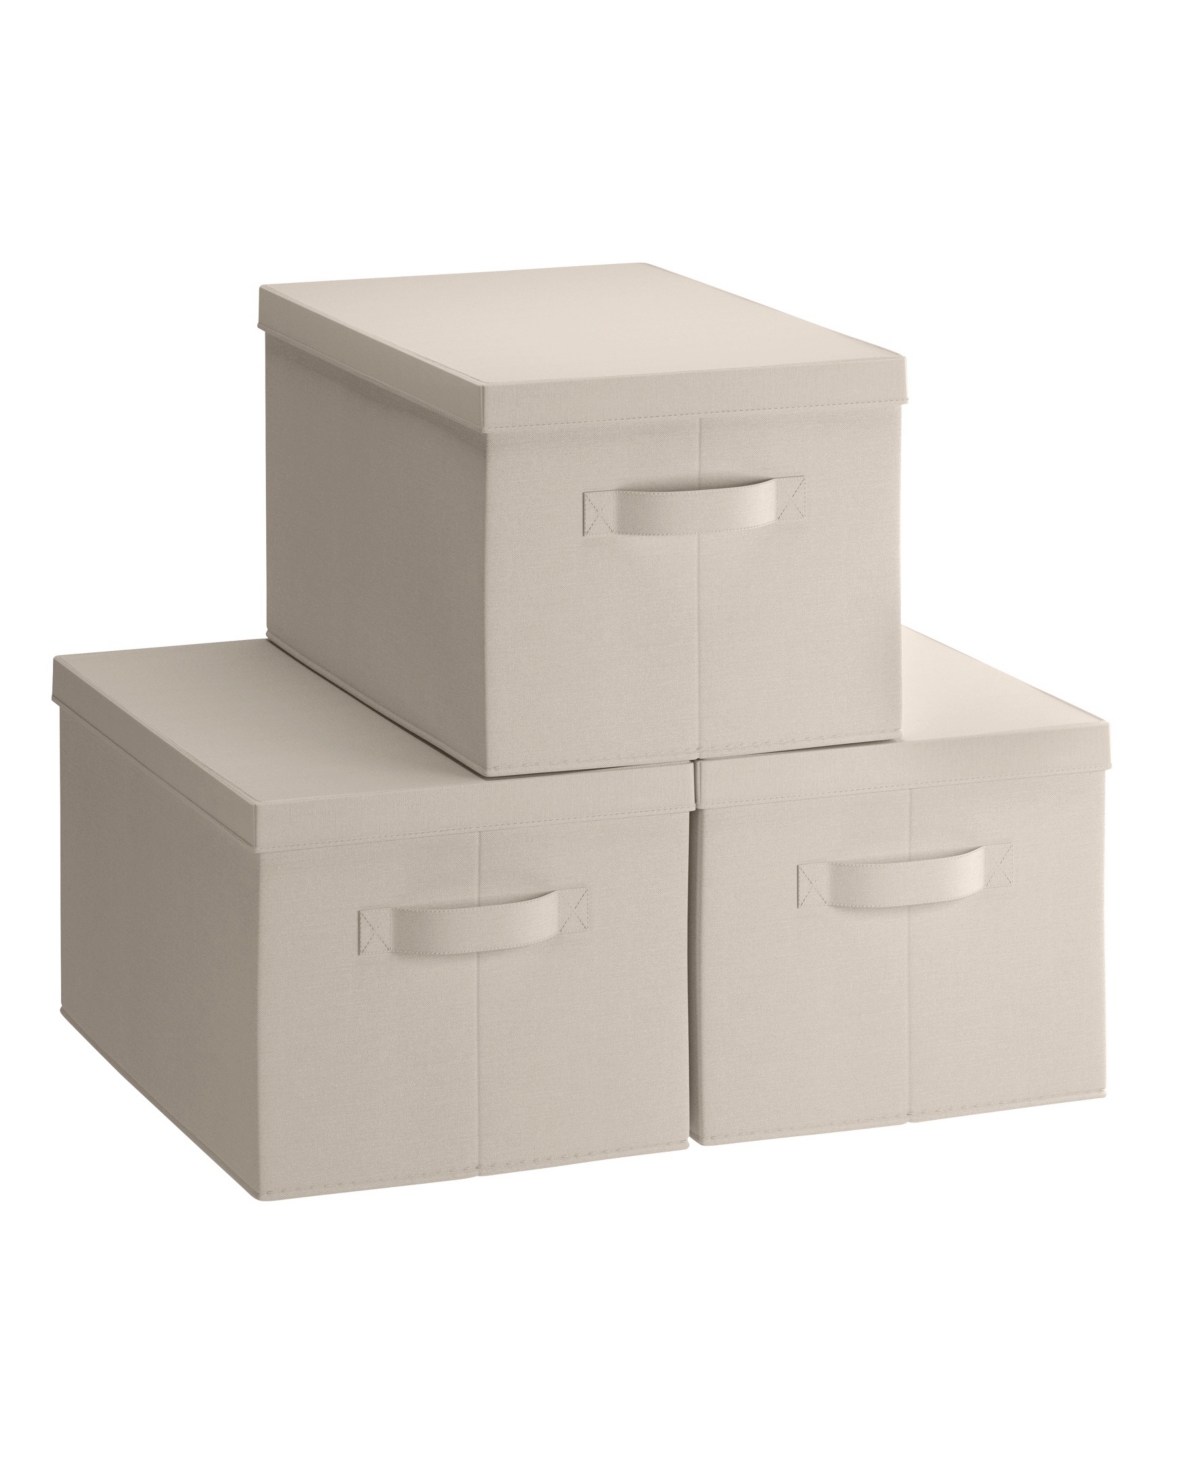 Ornavo Home Foldable Large Storage Bin With Handles And Lid In Beige